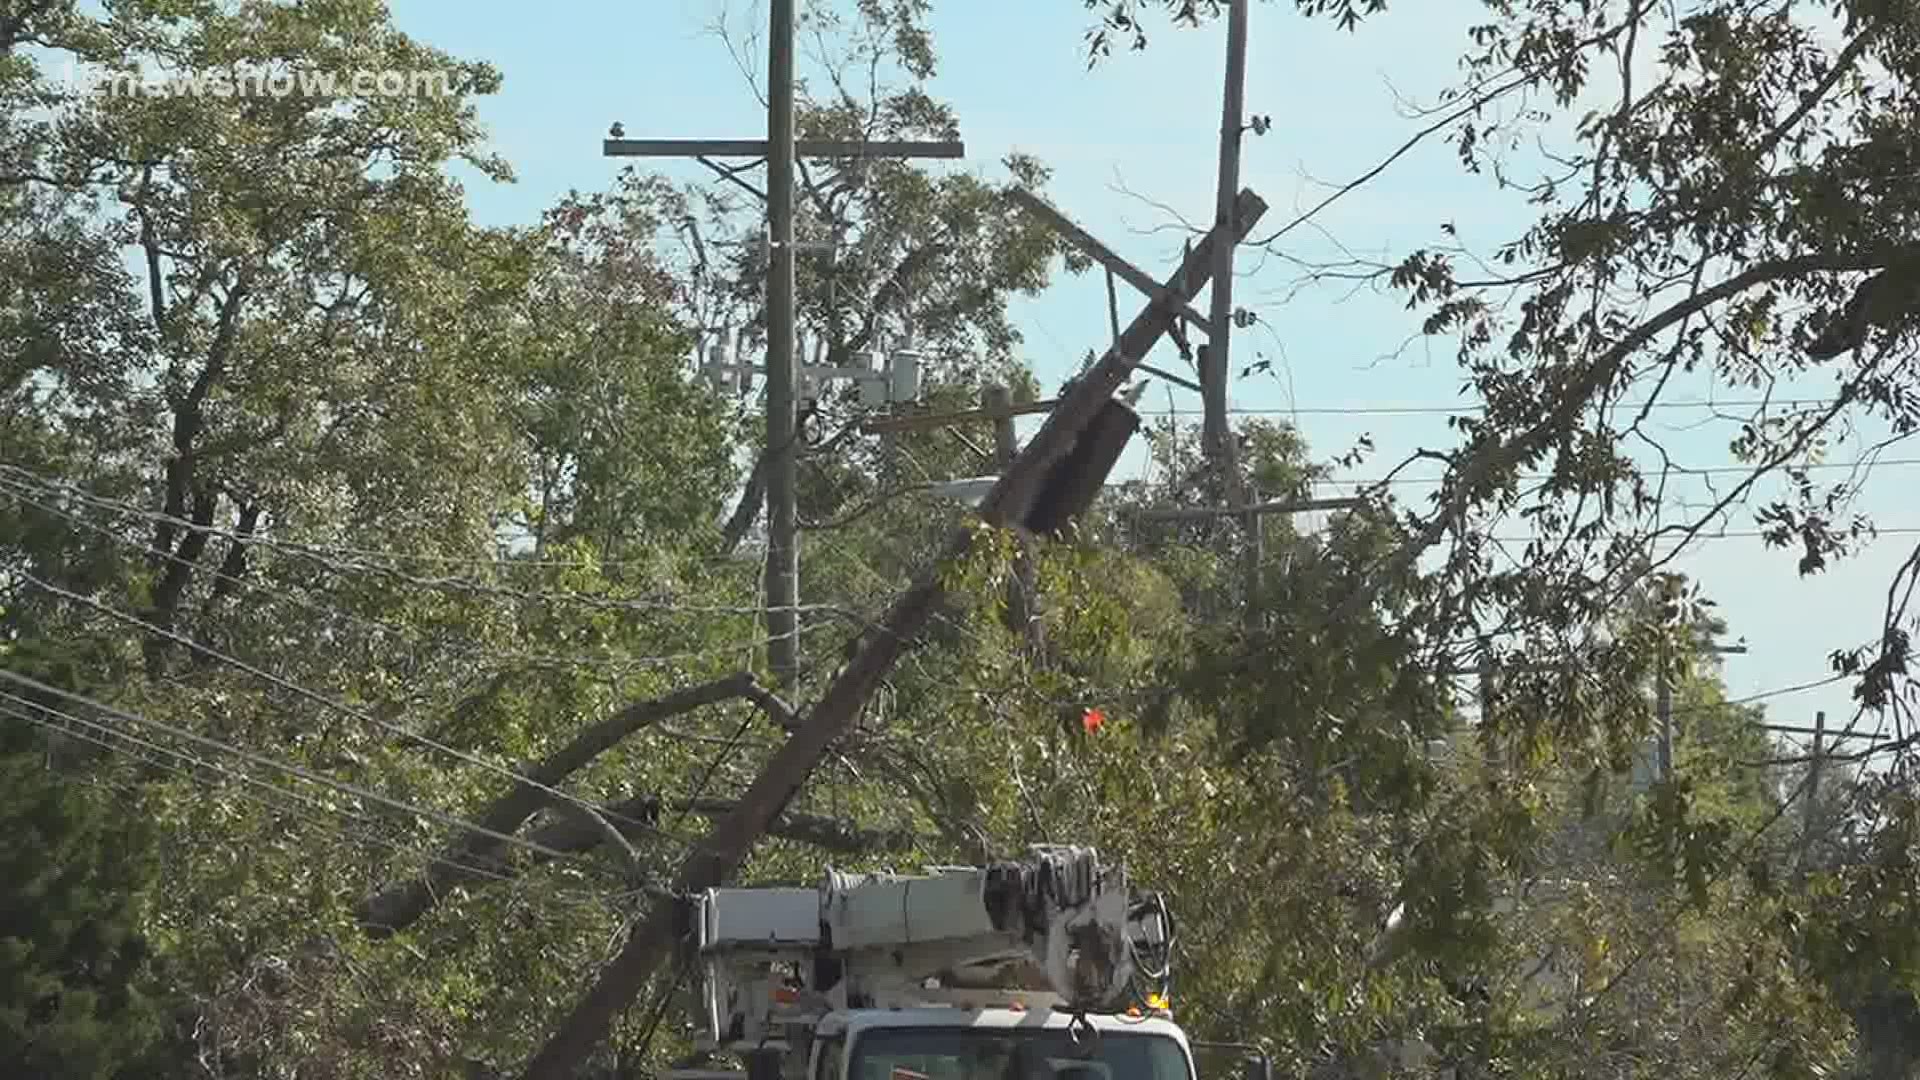 Entergy is reporting that as of 3:30 p.m. Wednesday 3,662 customers were still without power down from the 108,891 that lost power at the peak of Hurricane Delta.